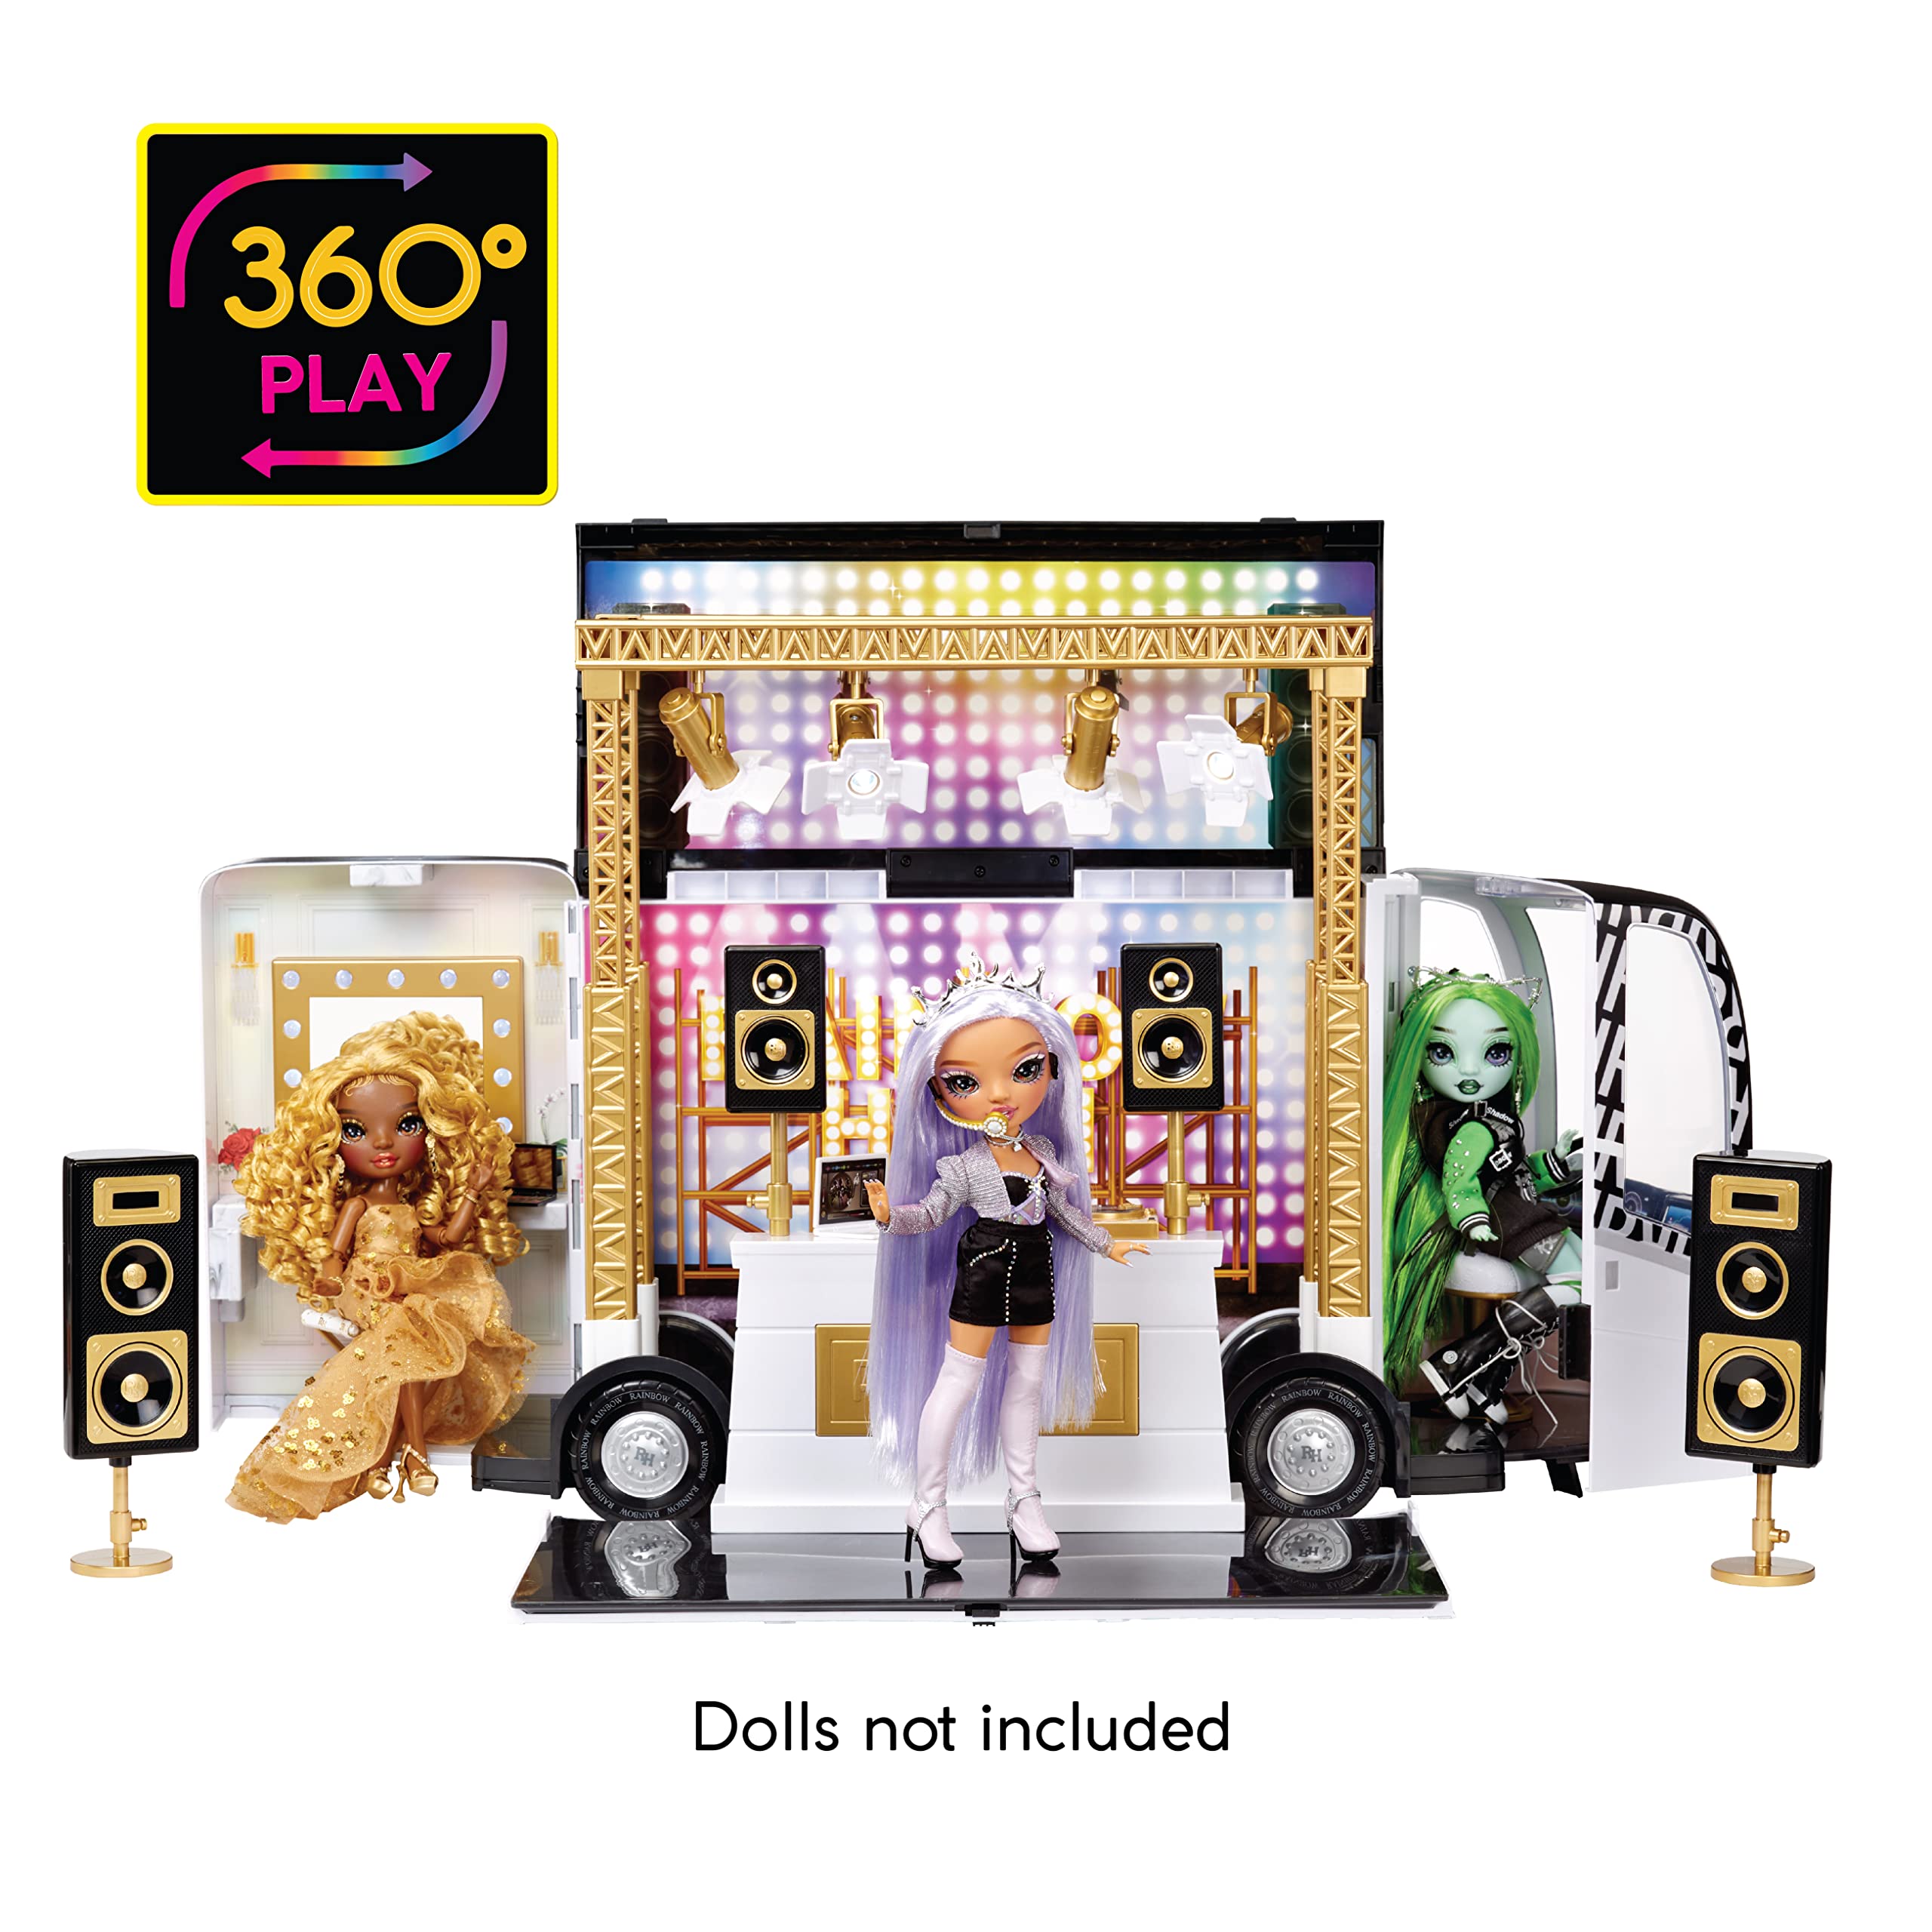 Rainbow High Rainbow Vision World Tour Bus & Stage. 4-in-1 Light-Up Deluxe Toy Playset Including DJ Booth and Accessories for 360 Degrees Play, Great Gift for Kids 6-12 Y - $60.00